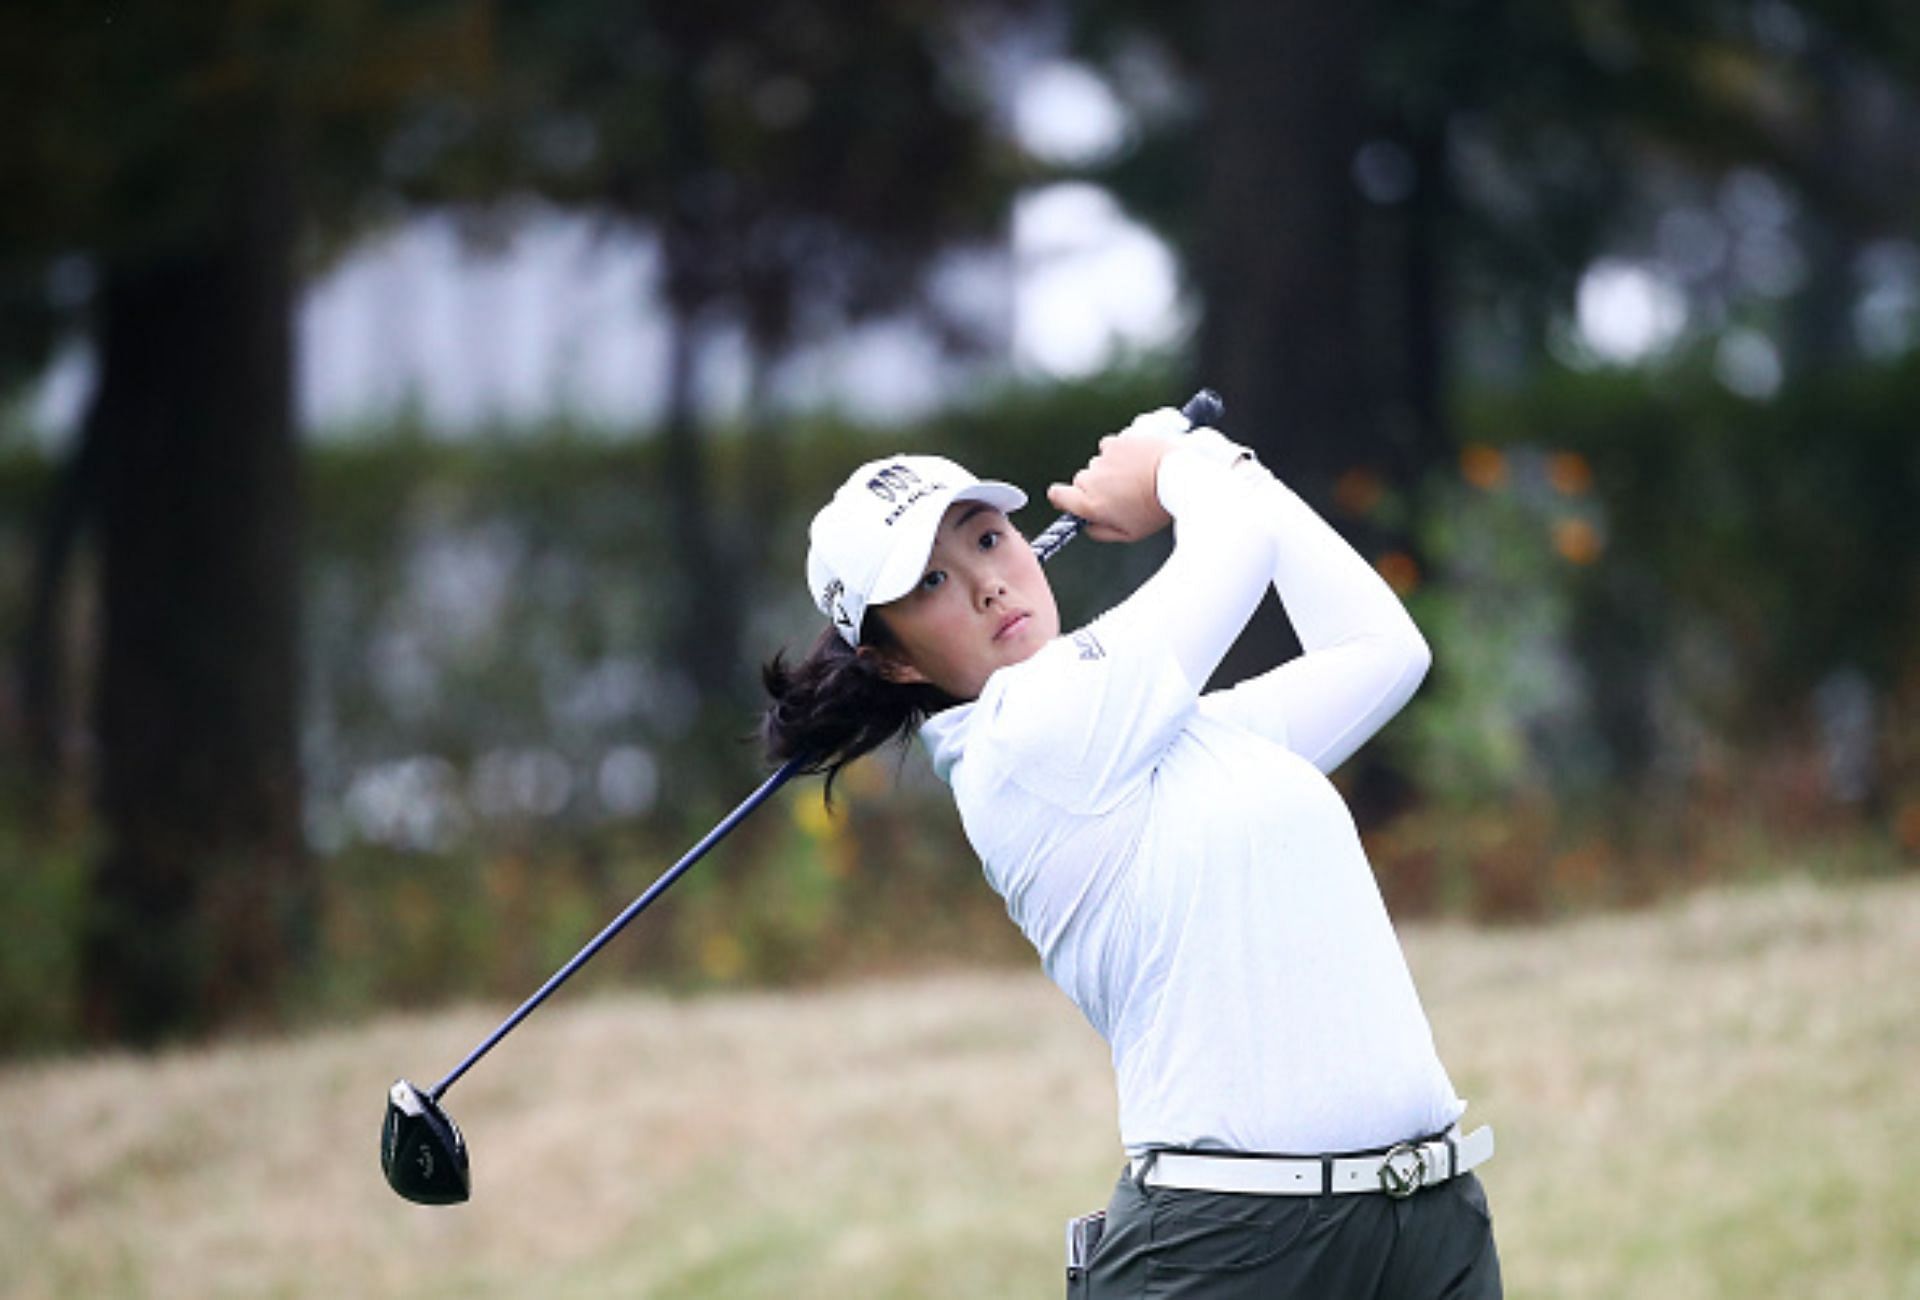 Ruoning Yin will be the top ranked golfer at the Maybank Championship (Image via Getty).